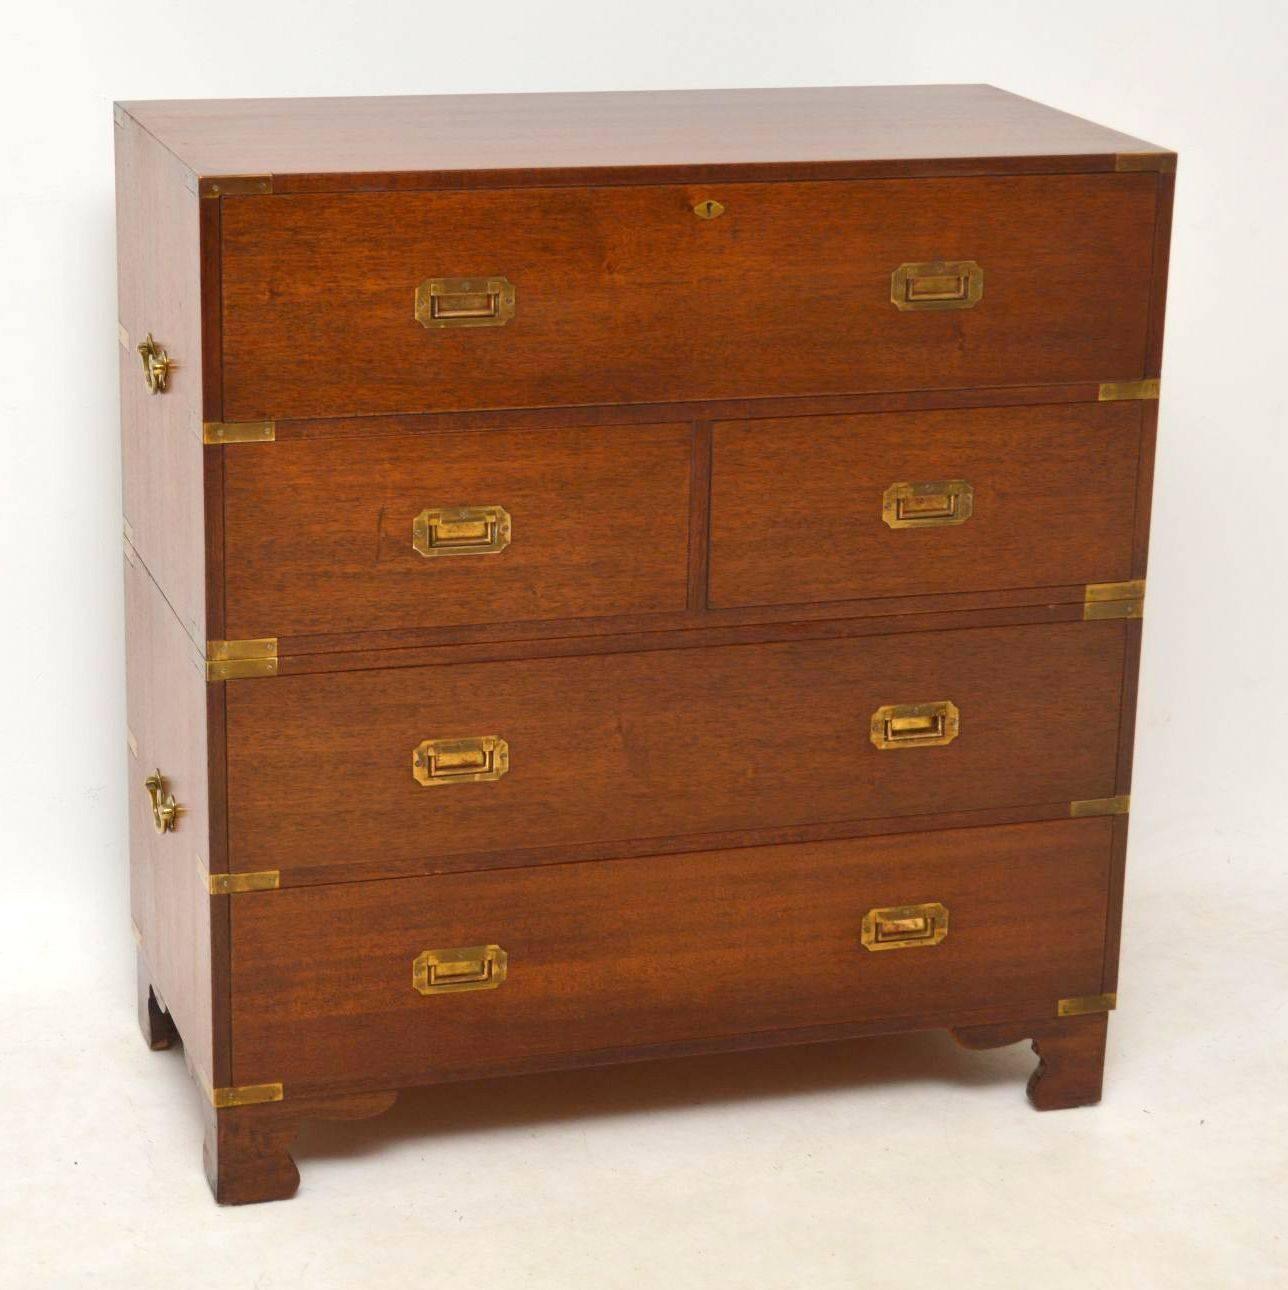 Antique Campaign style mahogany secretaire chest of drawers in good condition. It comes apart into two sections for easy transportation and has brass carrying handles on the sides. It also has brass corner fittings and inset brass military handles